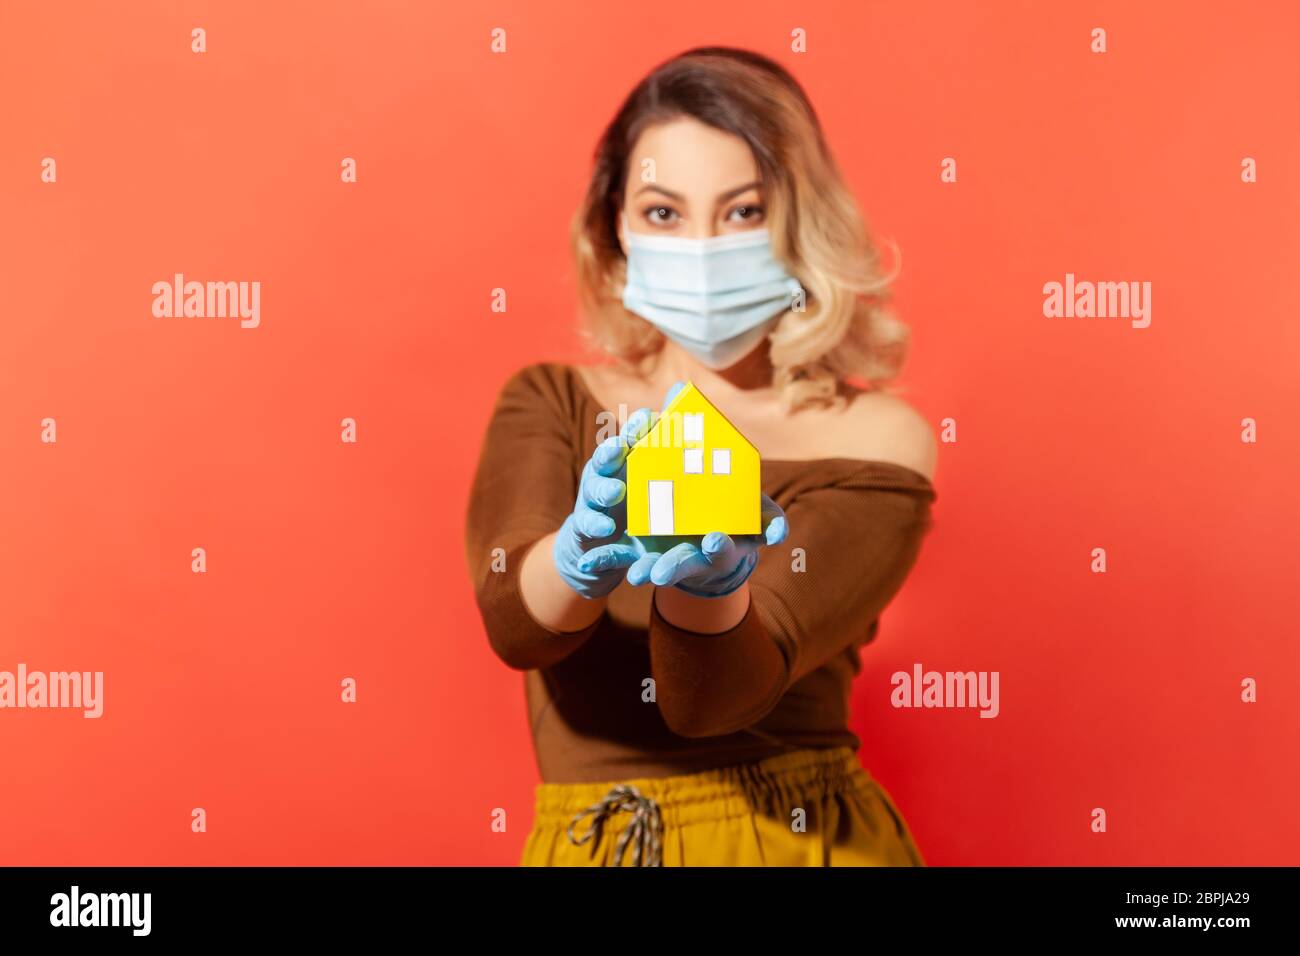 Woman in protective mask and gloves showing paper house on her hand, recommendation to stay home, adhere quarantine while contagious disease spread, c Stock Photo